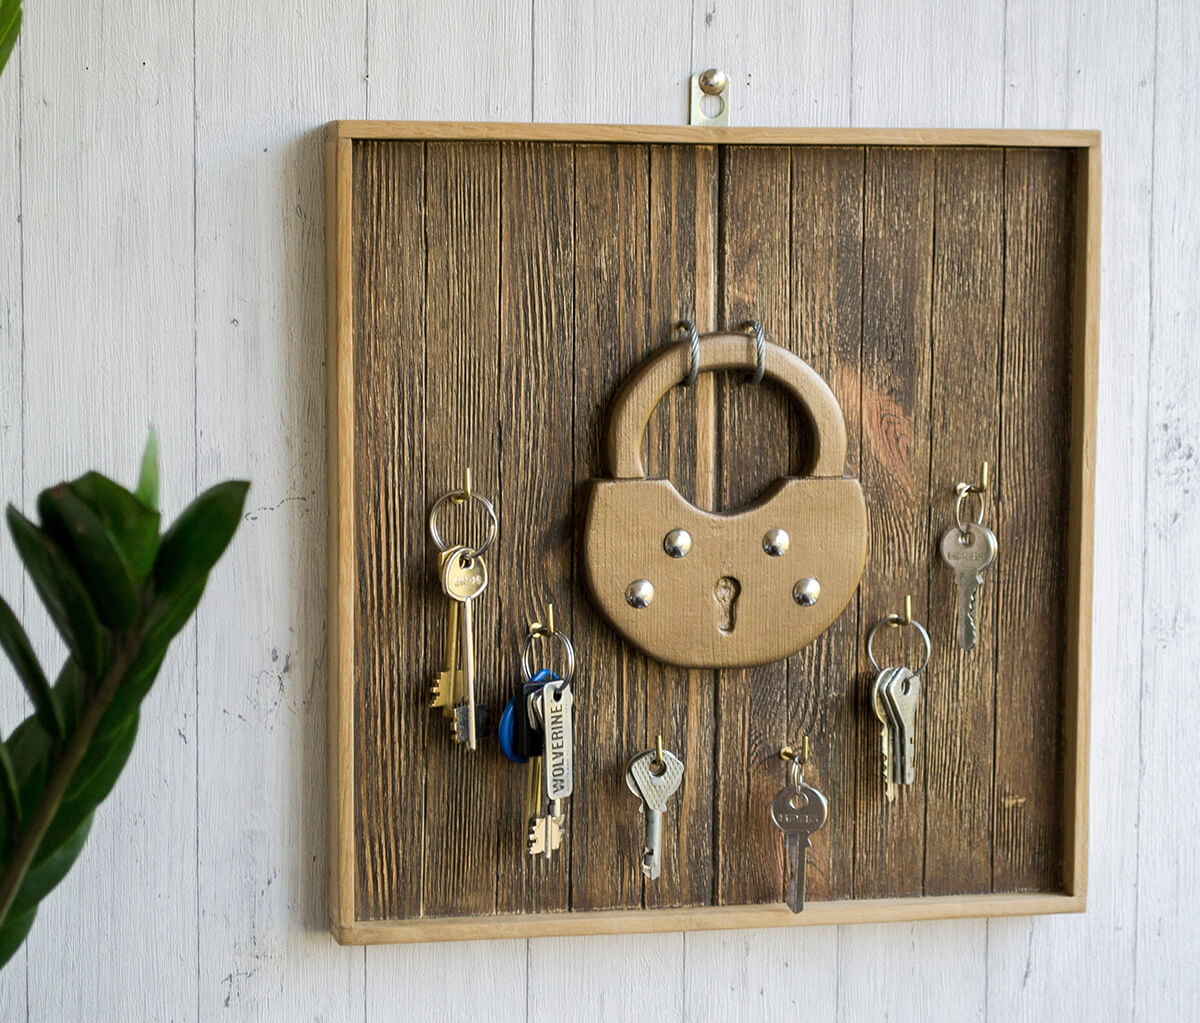 Antique Lock to Organize Your Keys